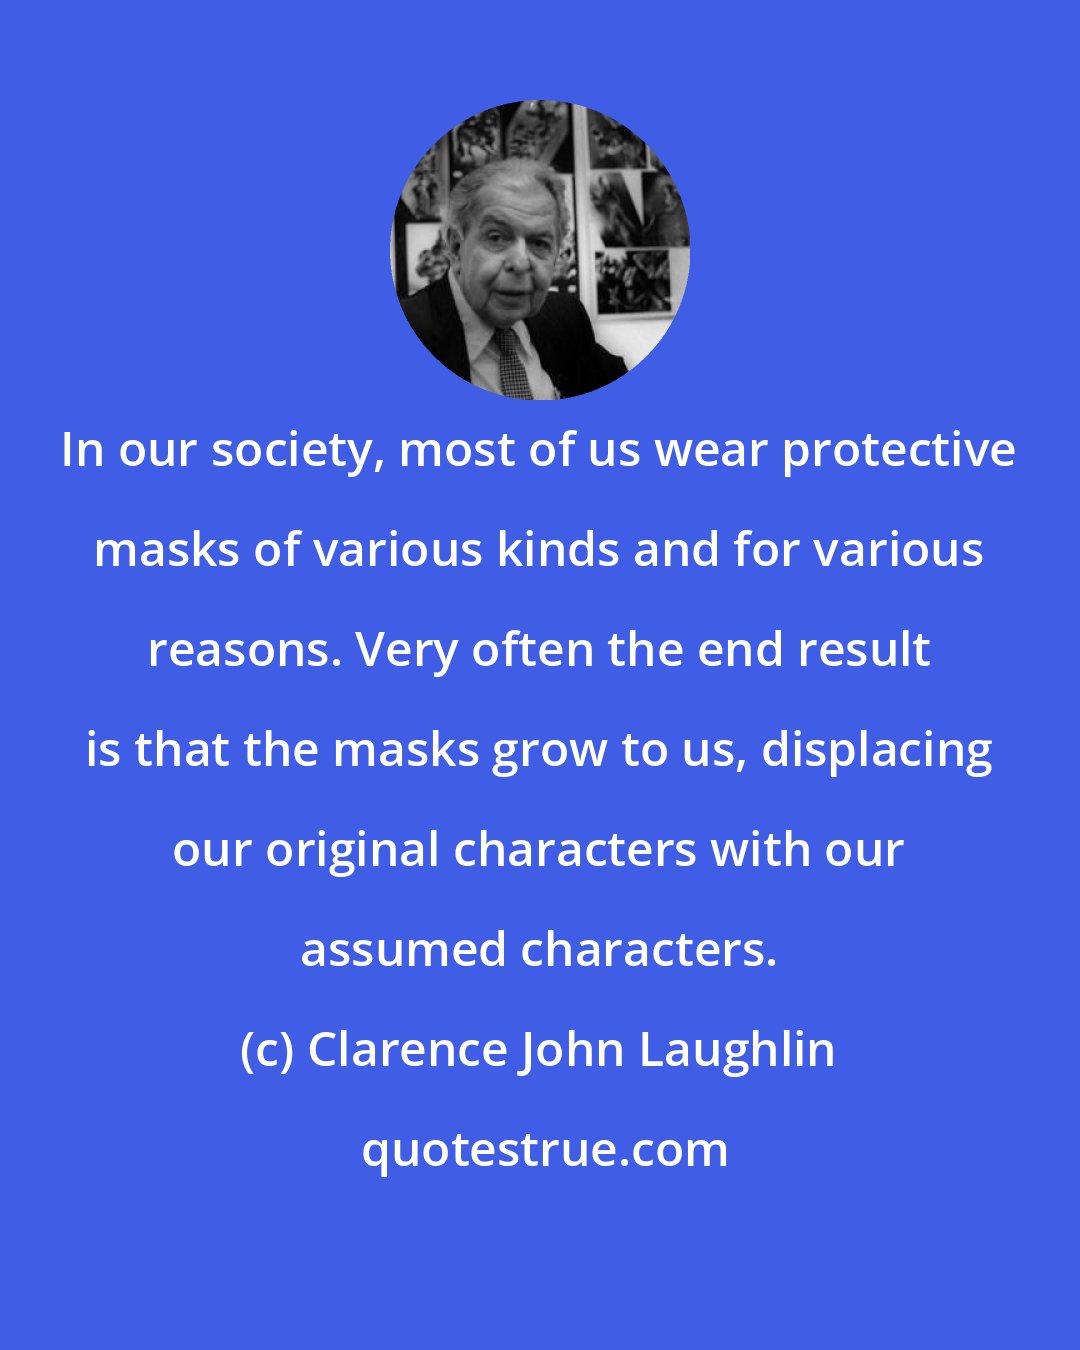 Clarence John Laughlin: In our society, most of us wear protective masks of various kinds and for various reasons. Very often the end result is that the masks grow to us, displacing our original characters with our assumed characters.